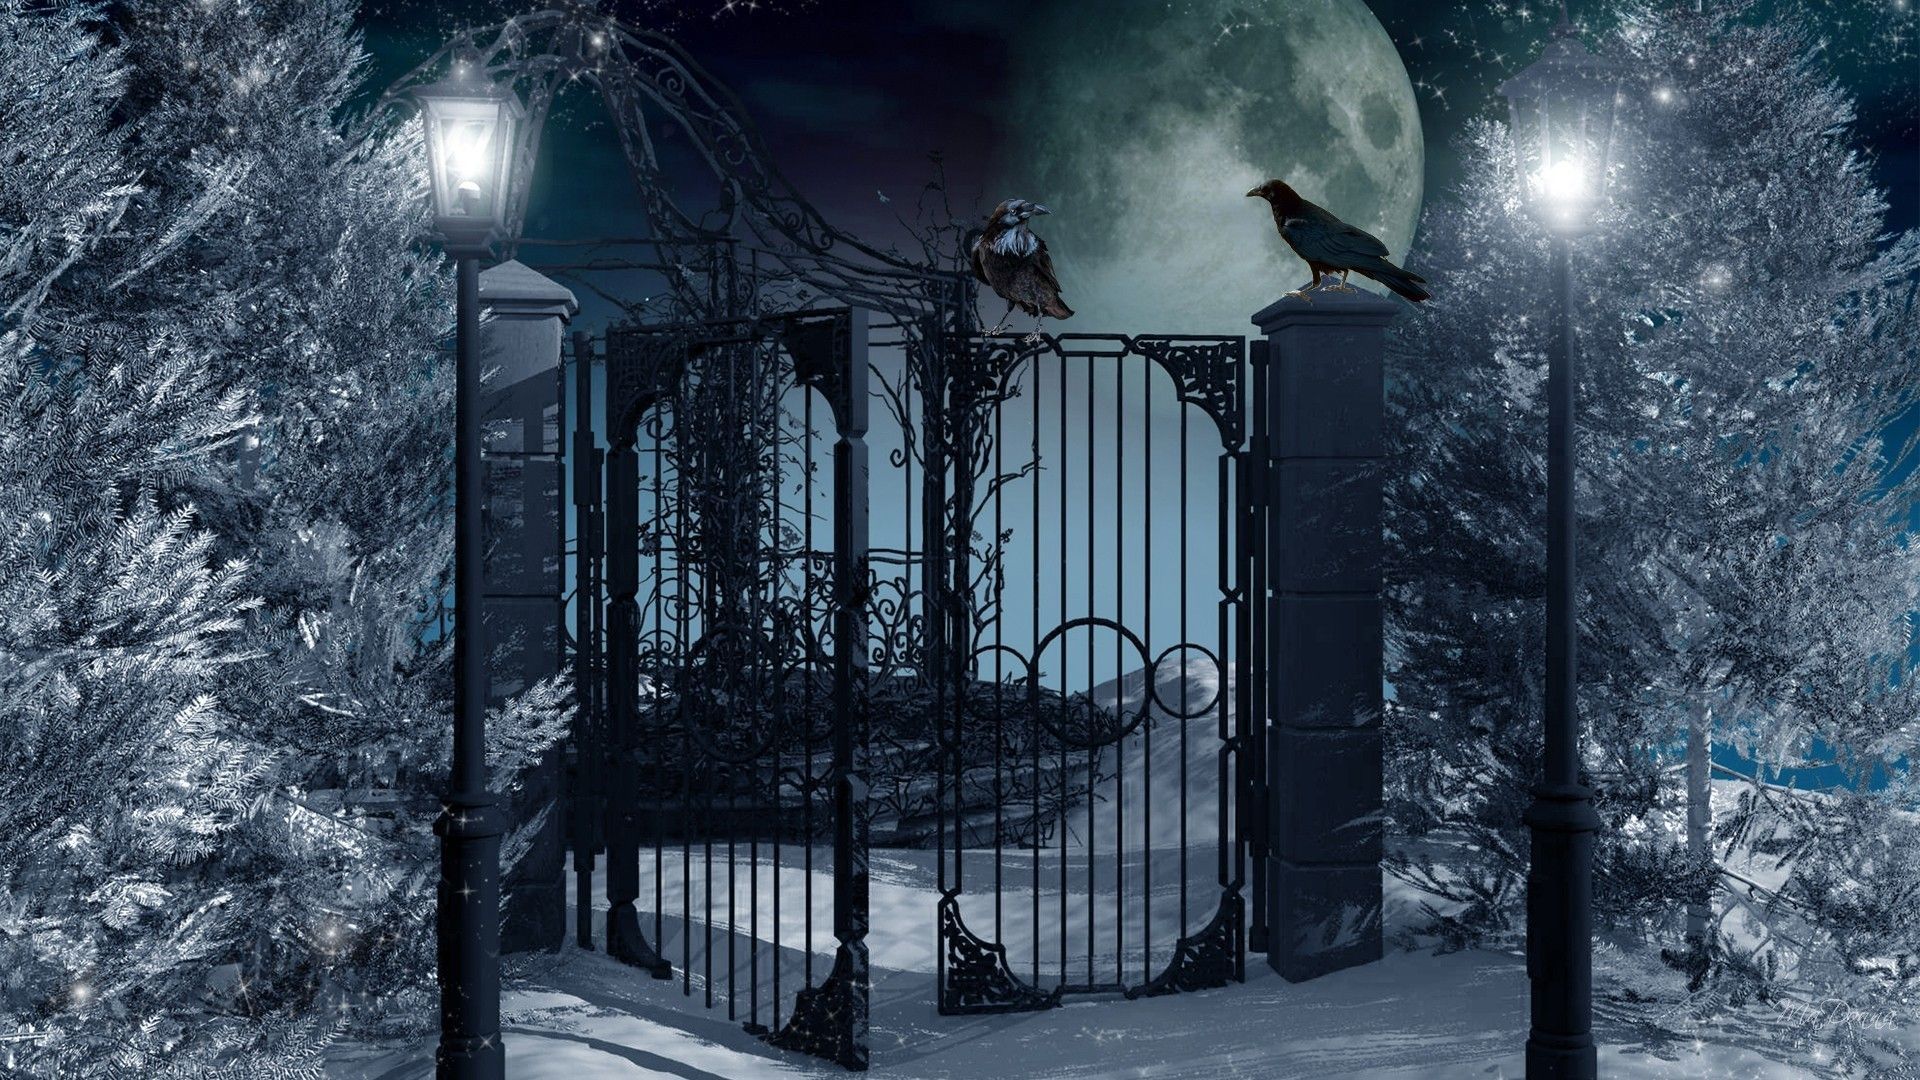 NatBG.com Winter Night Winters Mysterious Blue Birds Mystical Trees Lamp Lights Snow Ravens Haunting Full Mo. Wallpaper picture, Mystic garden, Background